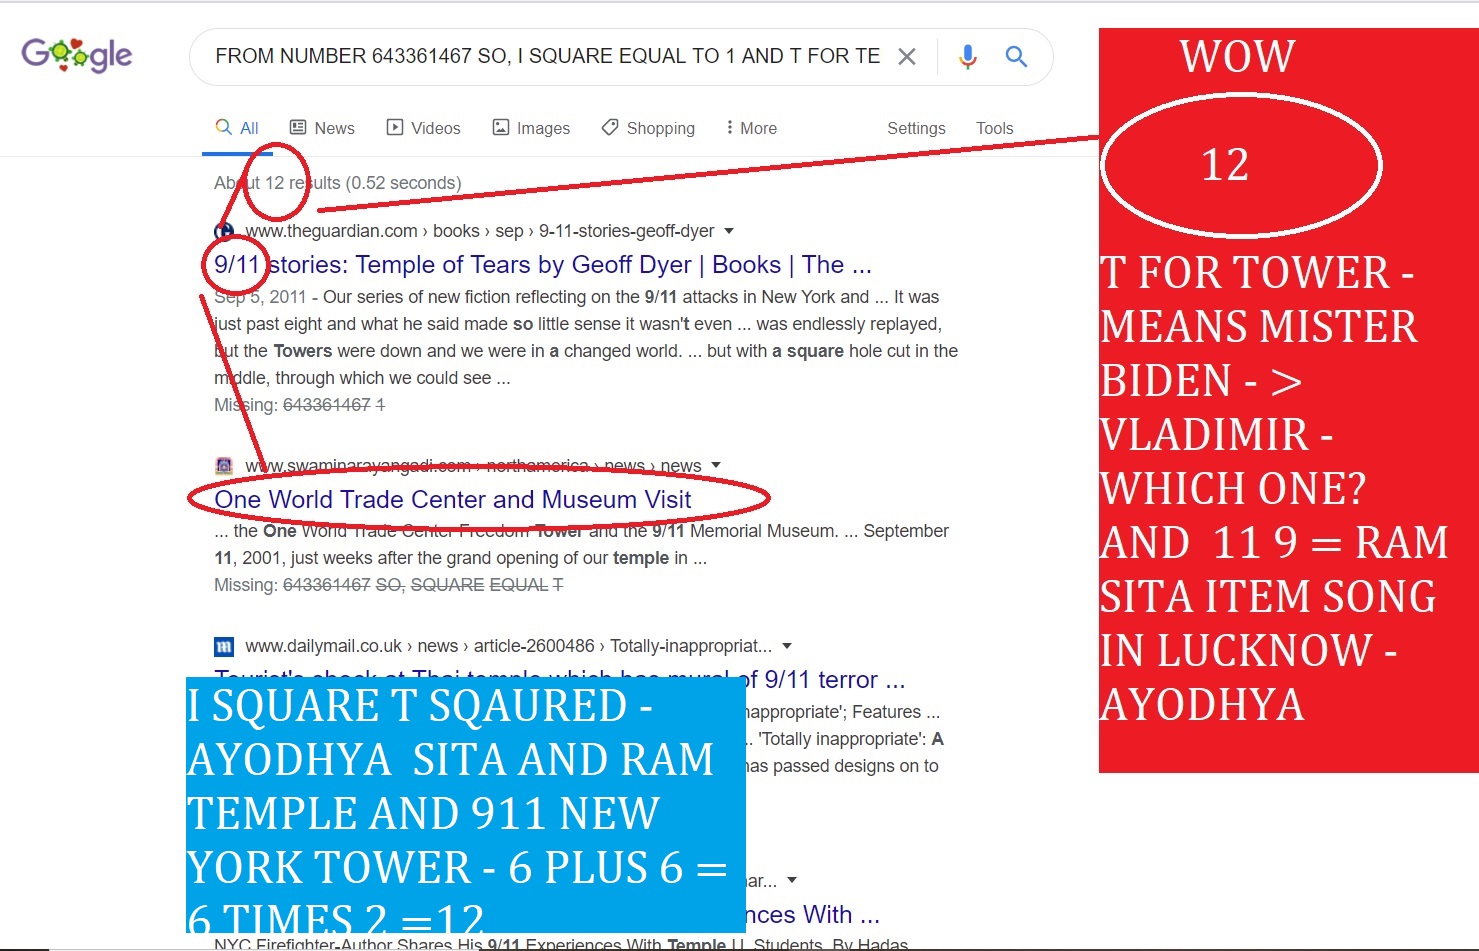 I SWQARE T SQAURED - AYODHYA SITA AND RAM TEMPLE AND 911 NEW YORK TOWR - 6 PLUS 6 = 6 TIMES 2 =12